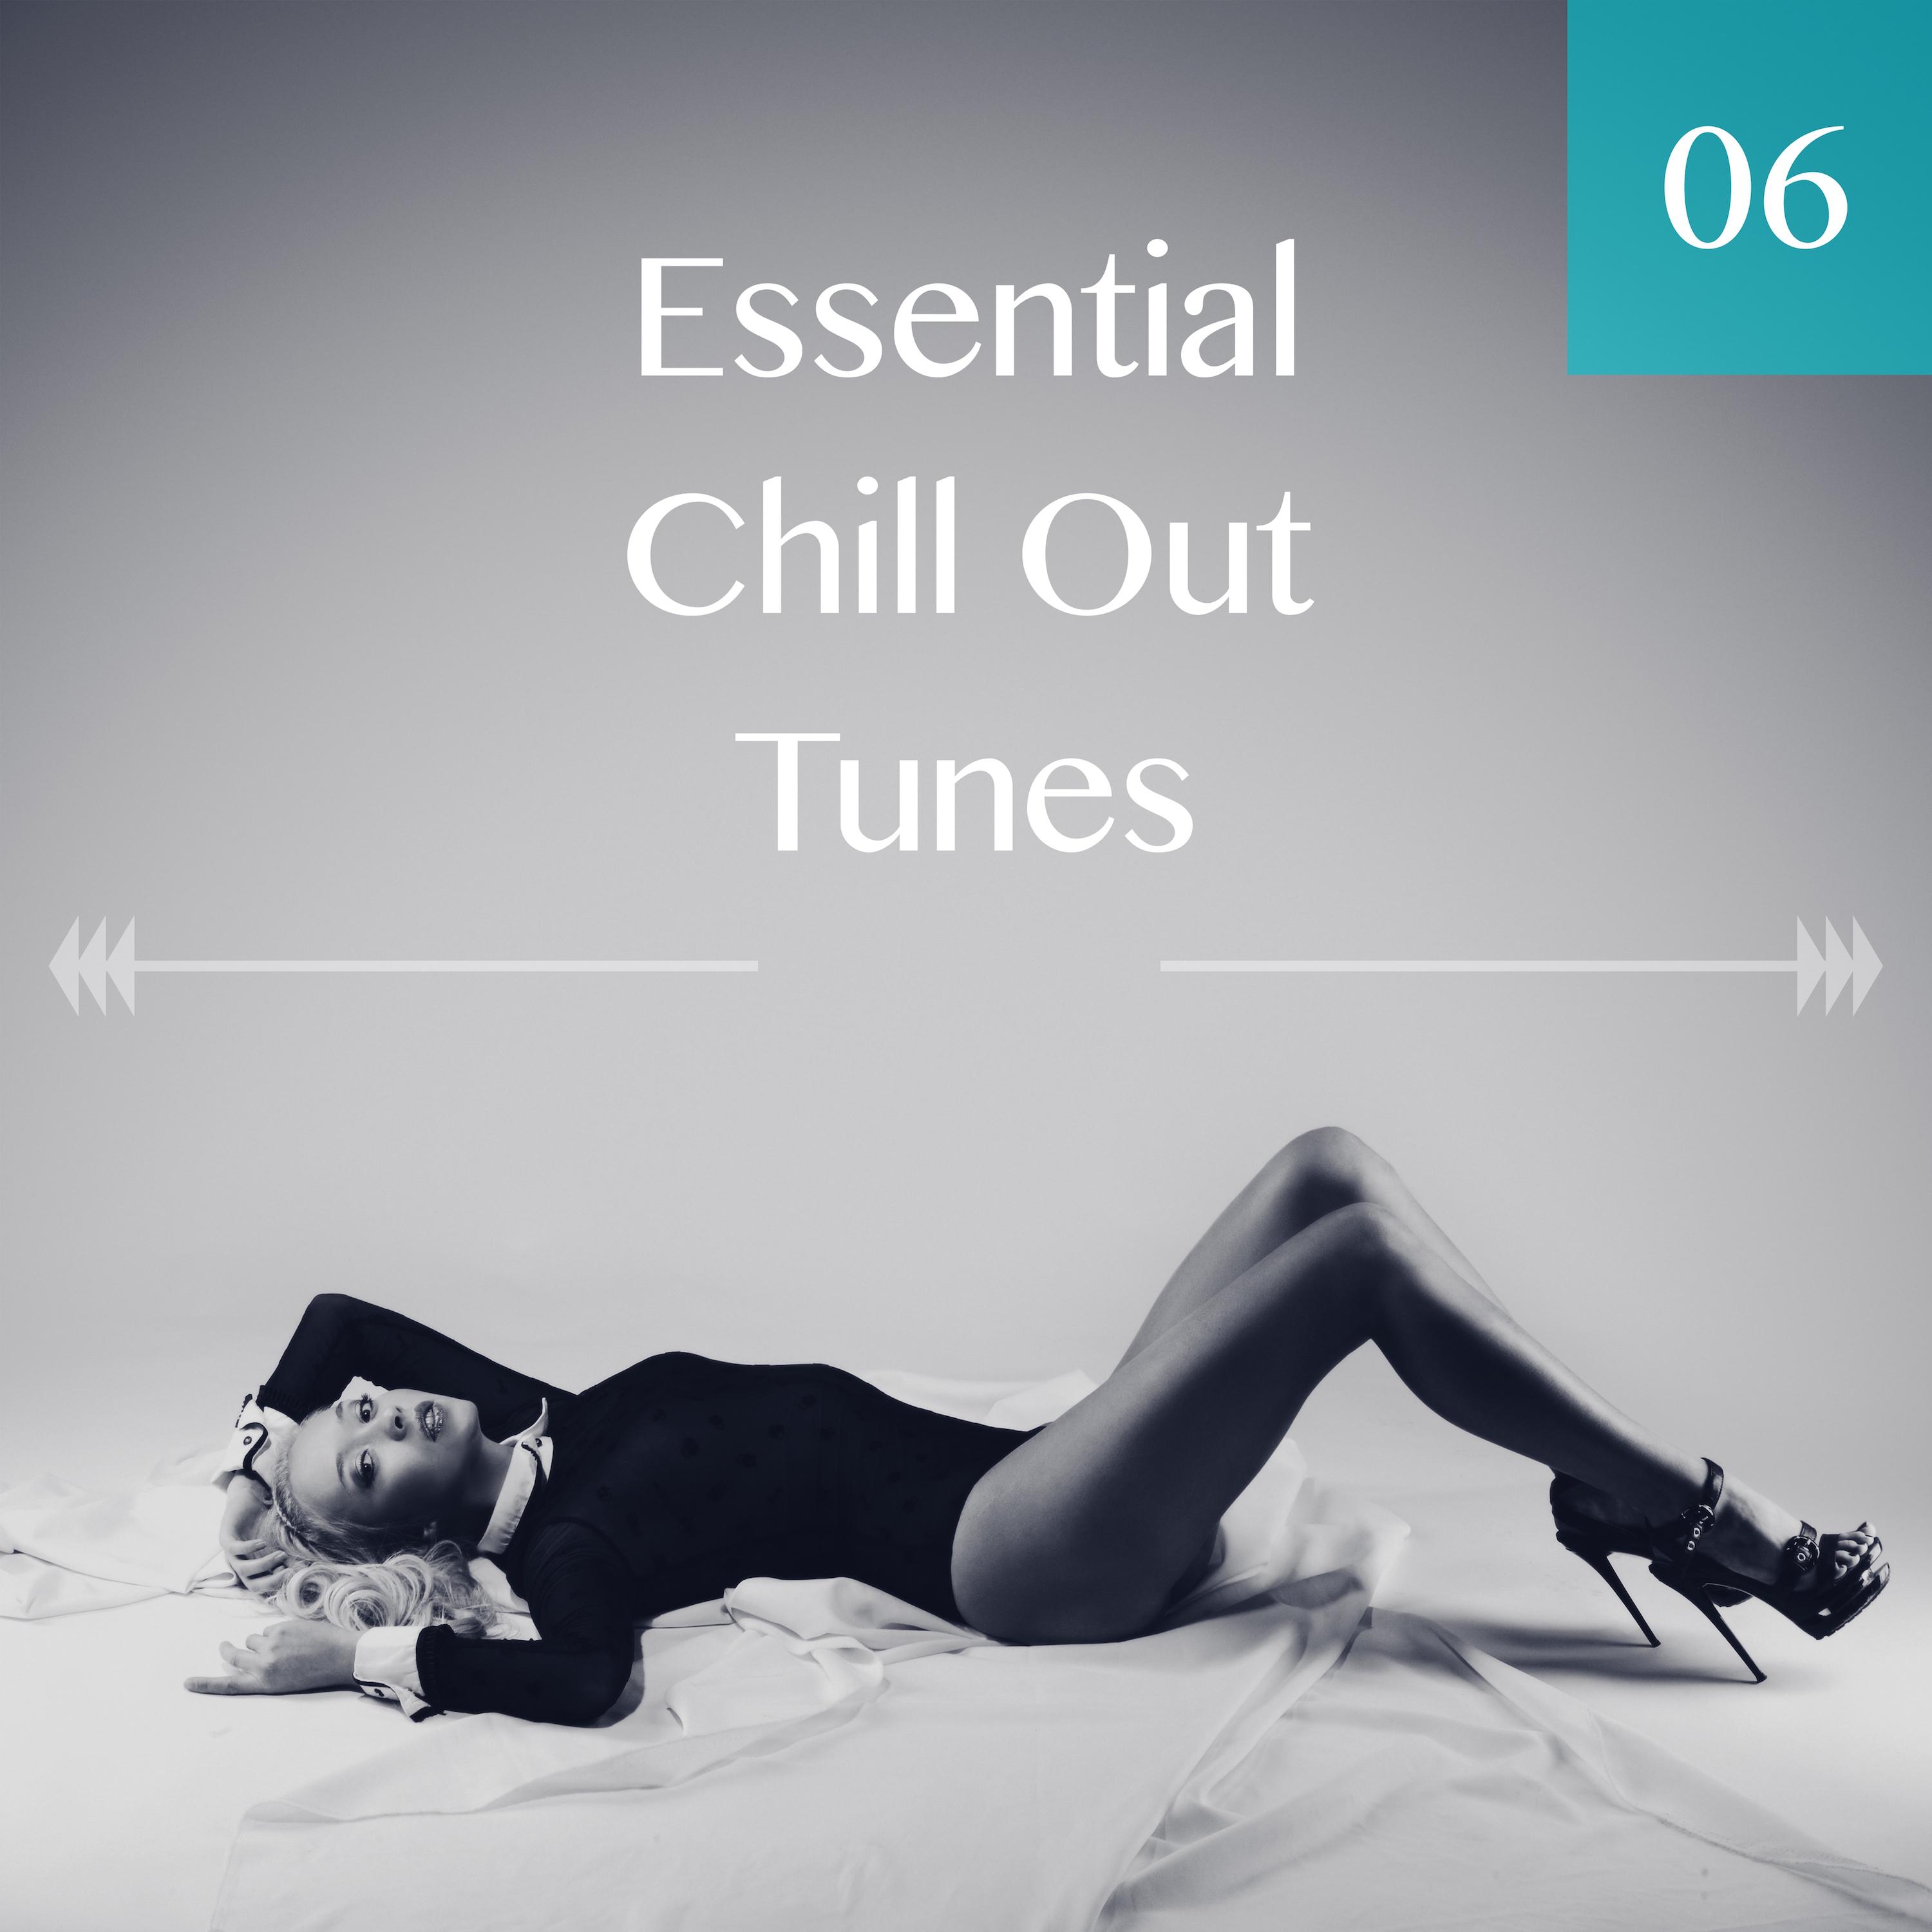 Essential Chill Out Tunes, Vol. 06